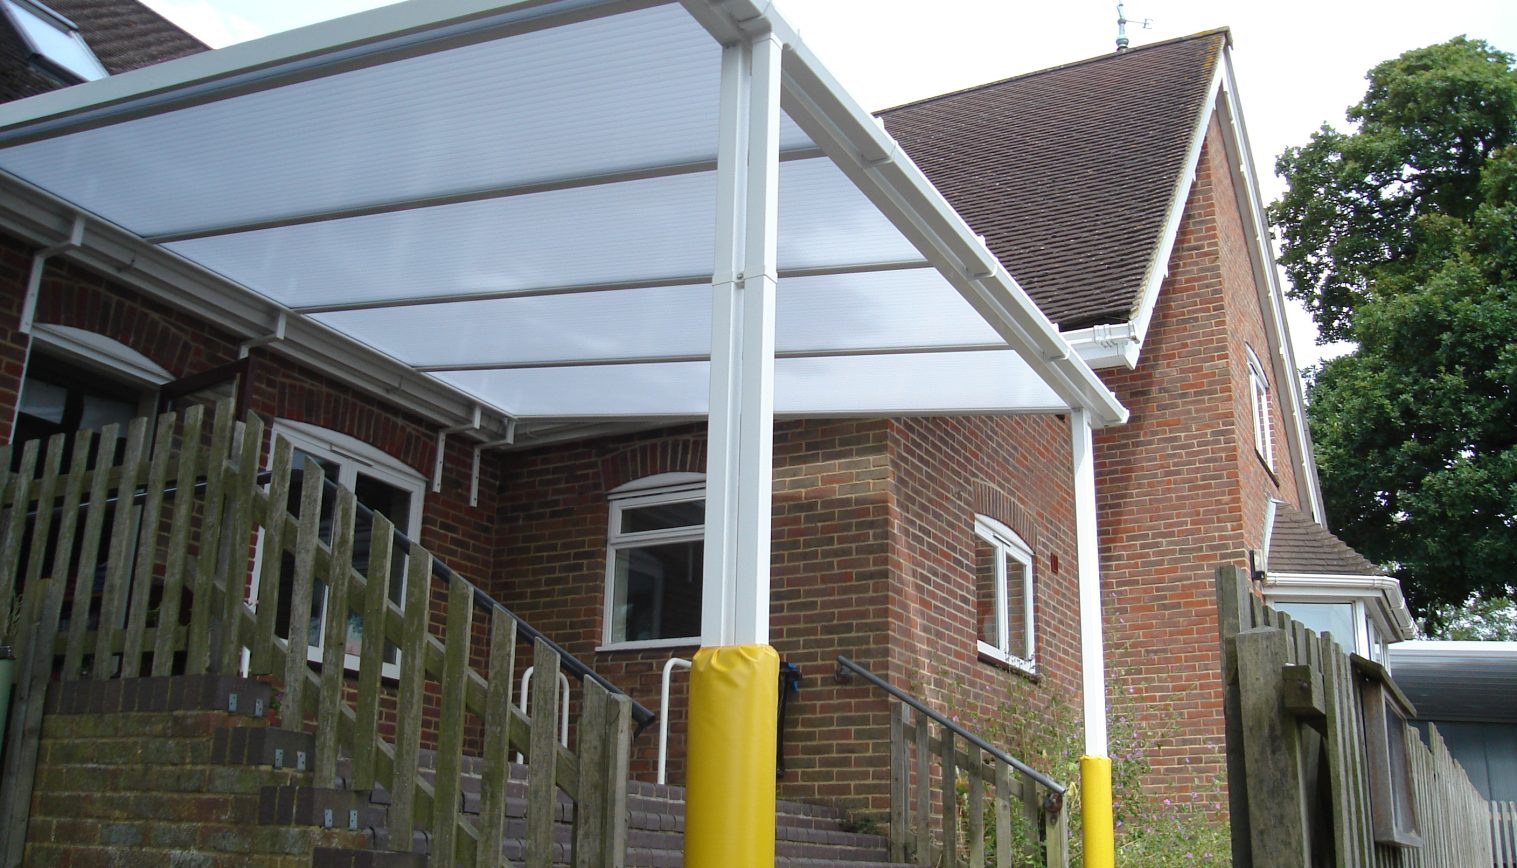 Mark Cross C of E Primary School – Wall Mounted Entrance Canopy